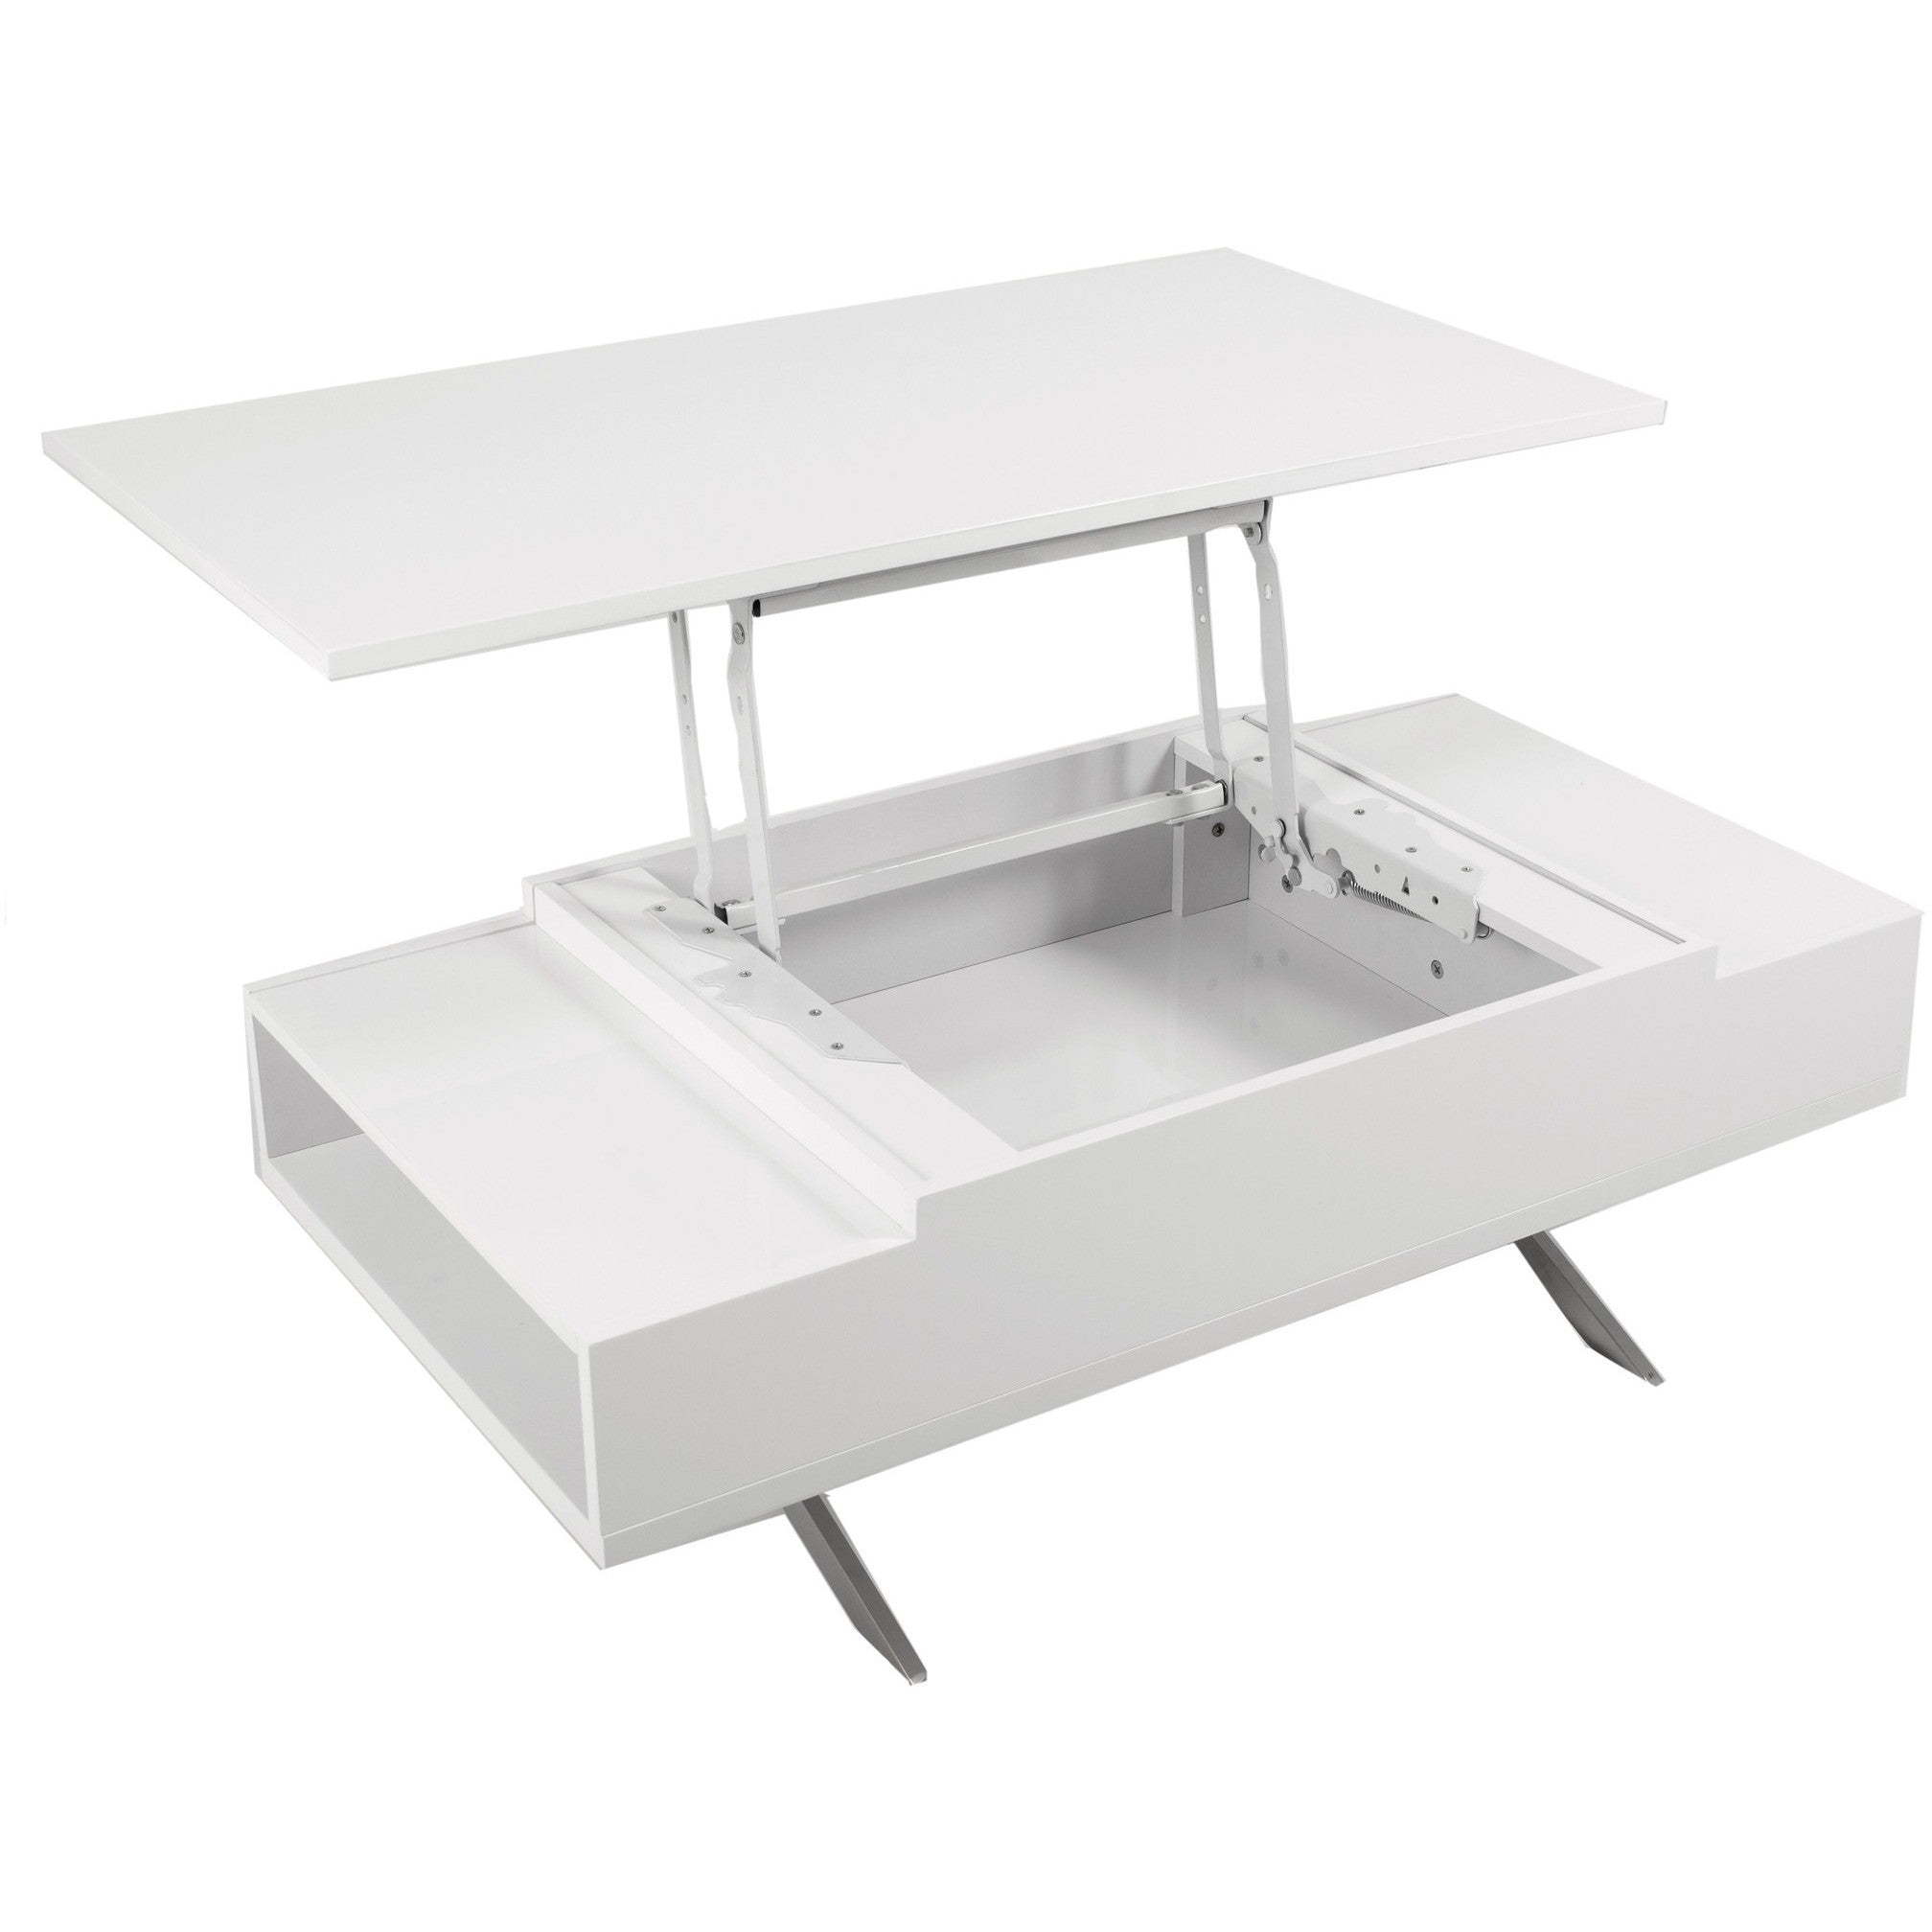 Stelar White Lift Top Rectangular Coffee Table By Matrix Coffee Table Direct